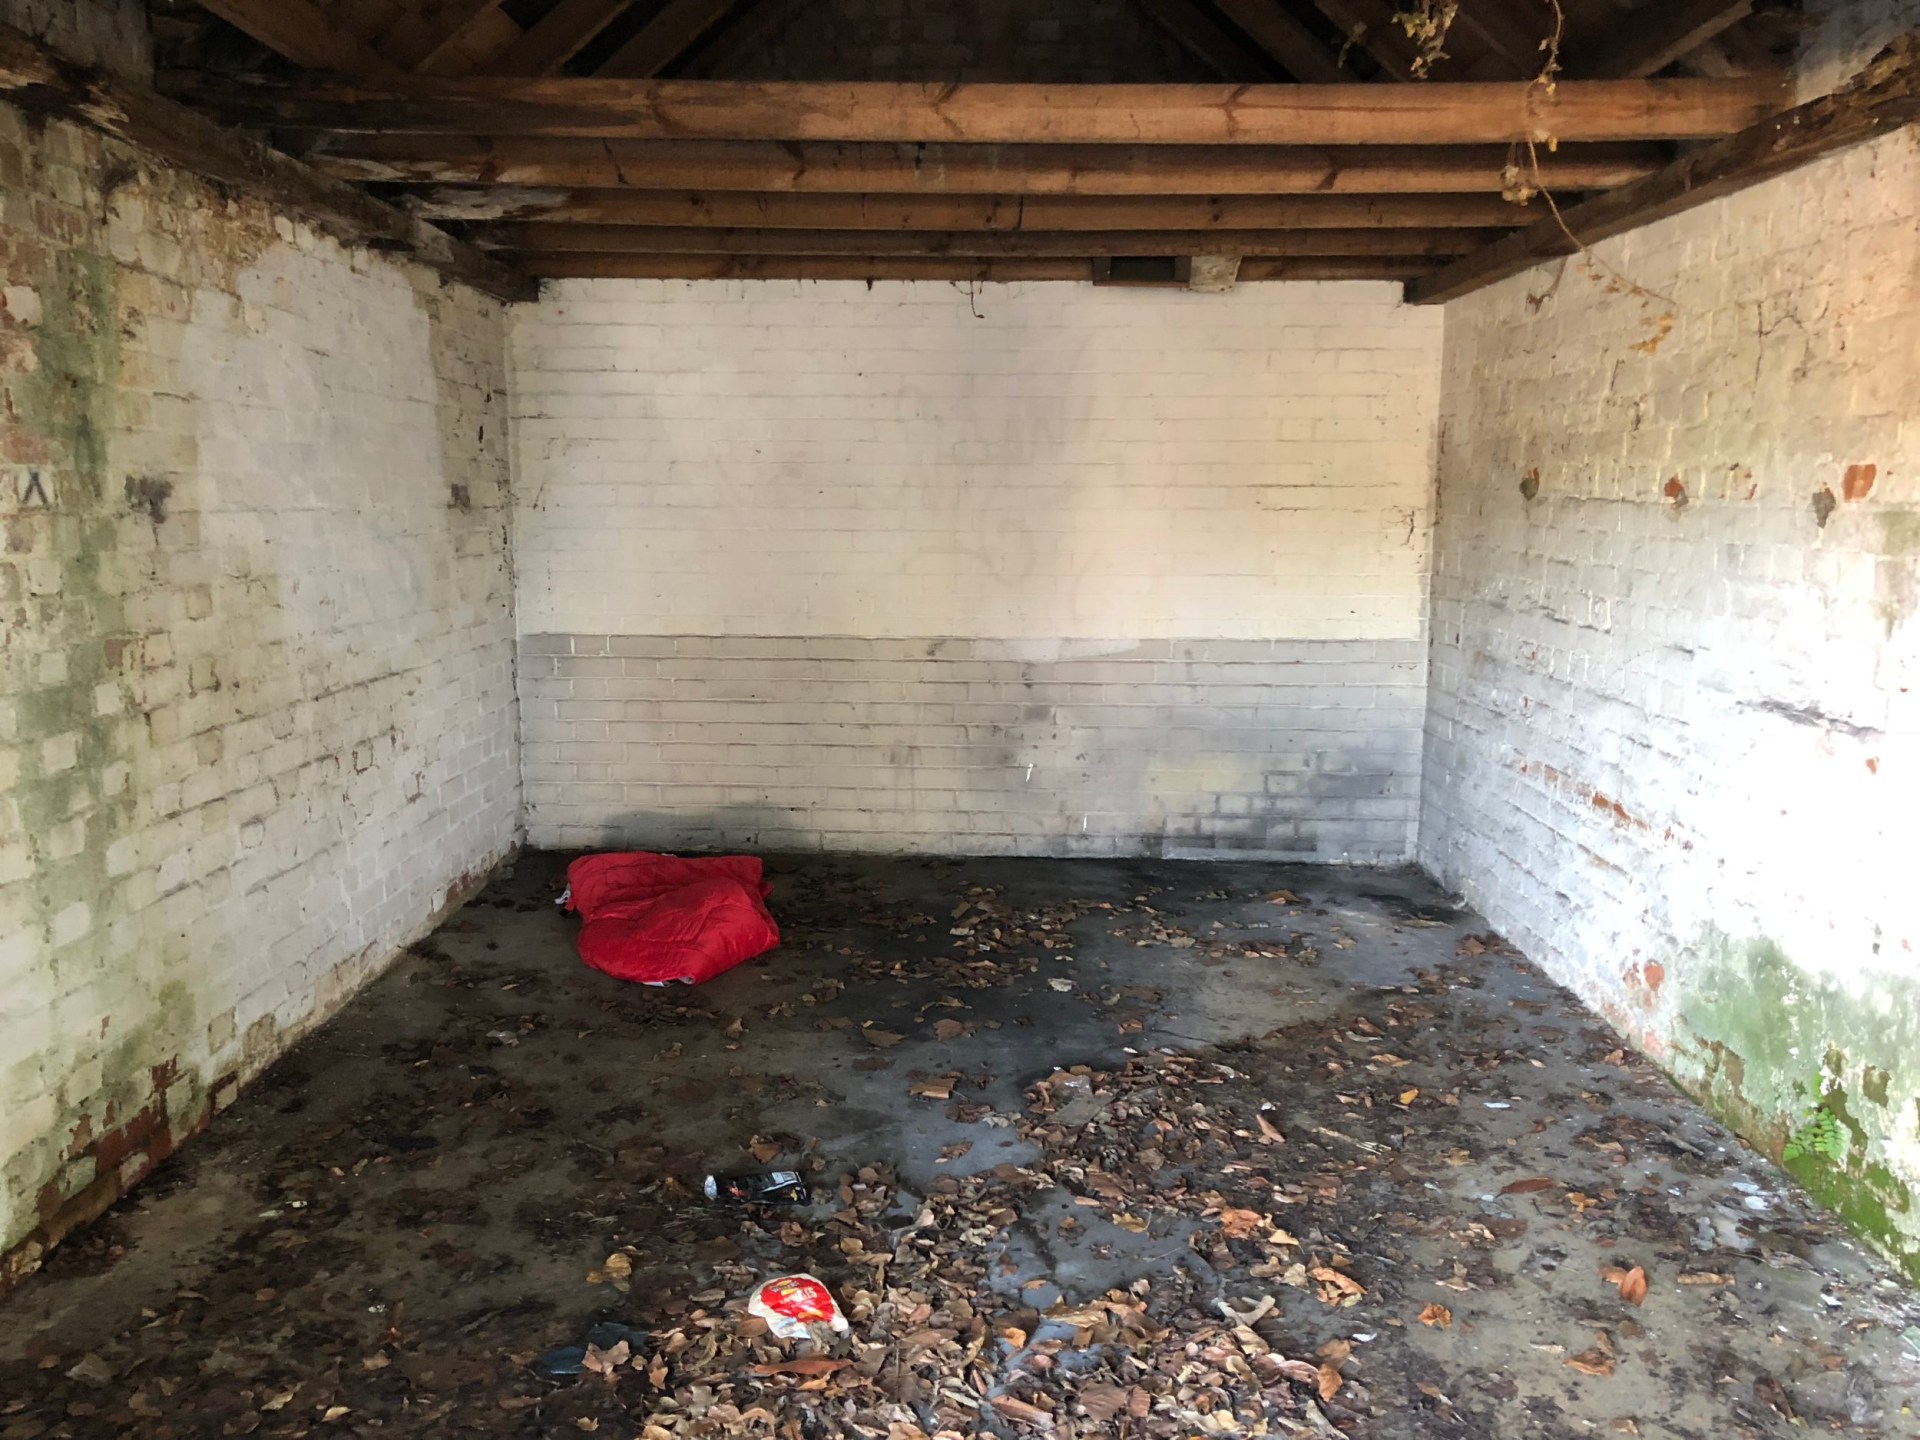 i turned a derelict garage that was being used as a toilet into a two-bed home